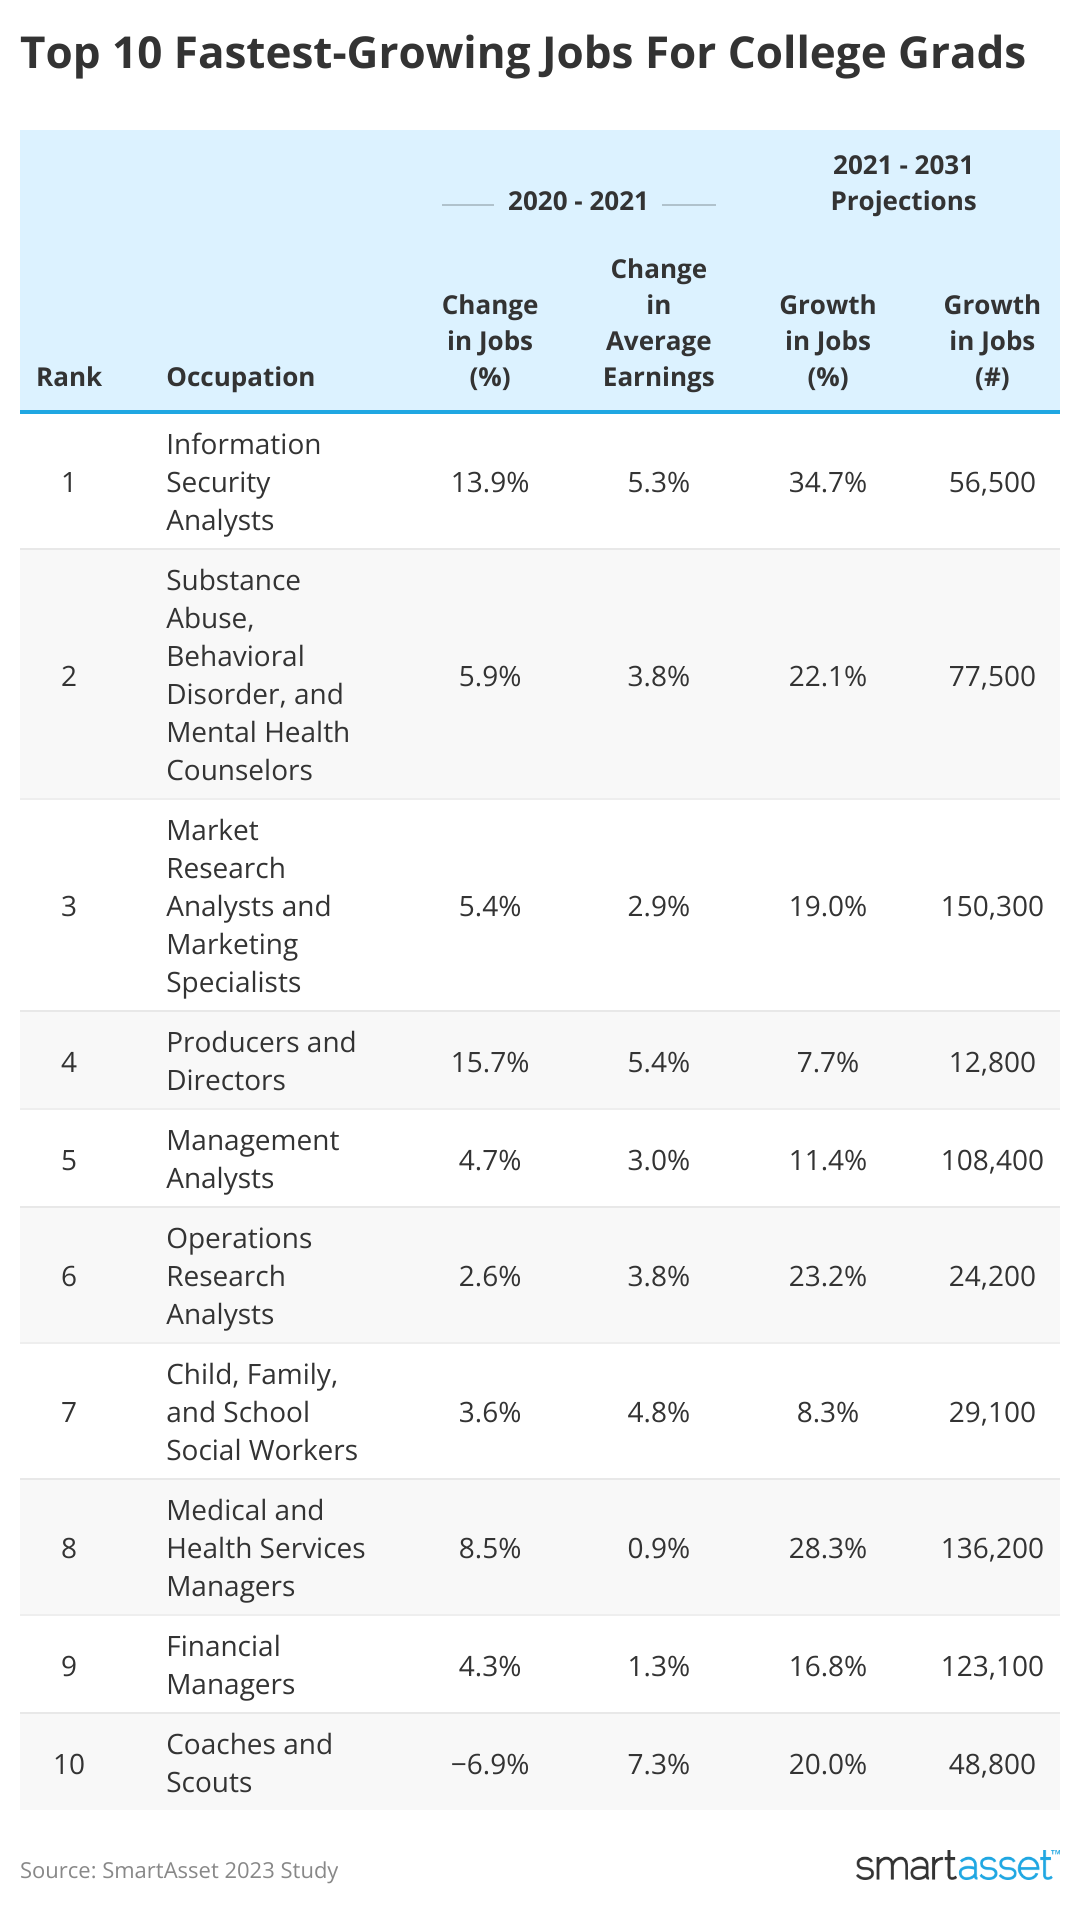 Table showing the top 10 fastest-growing jobs for college grads.